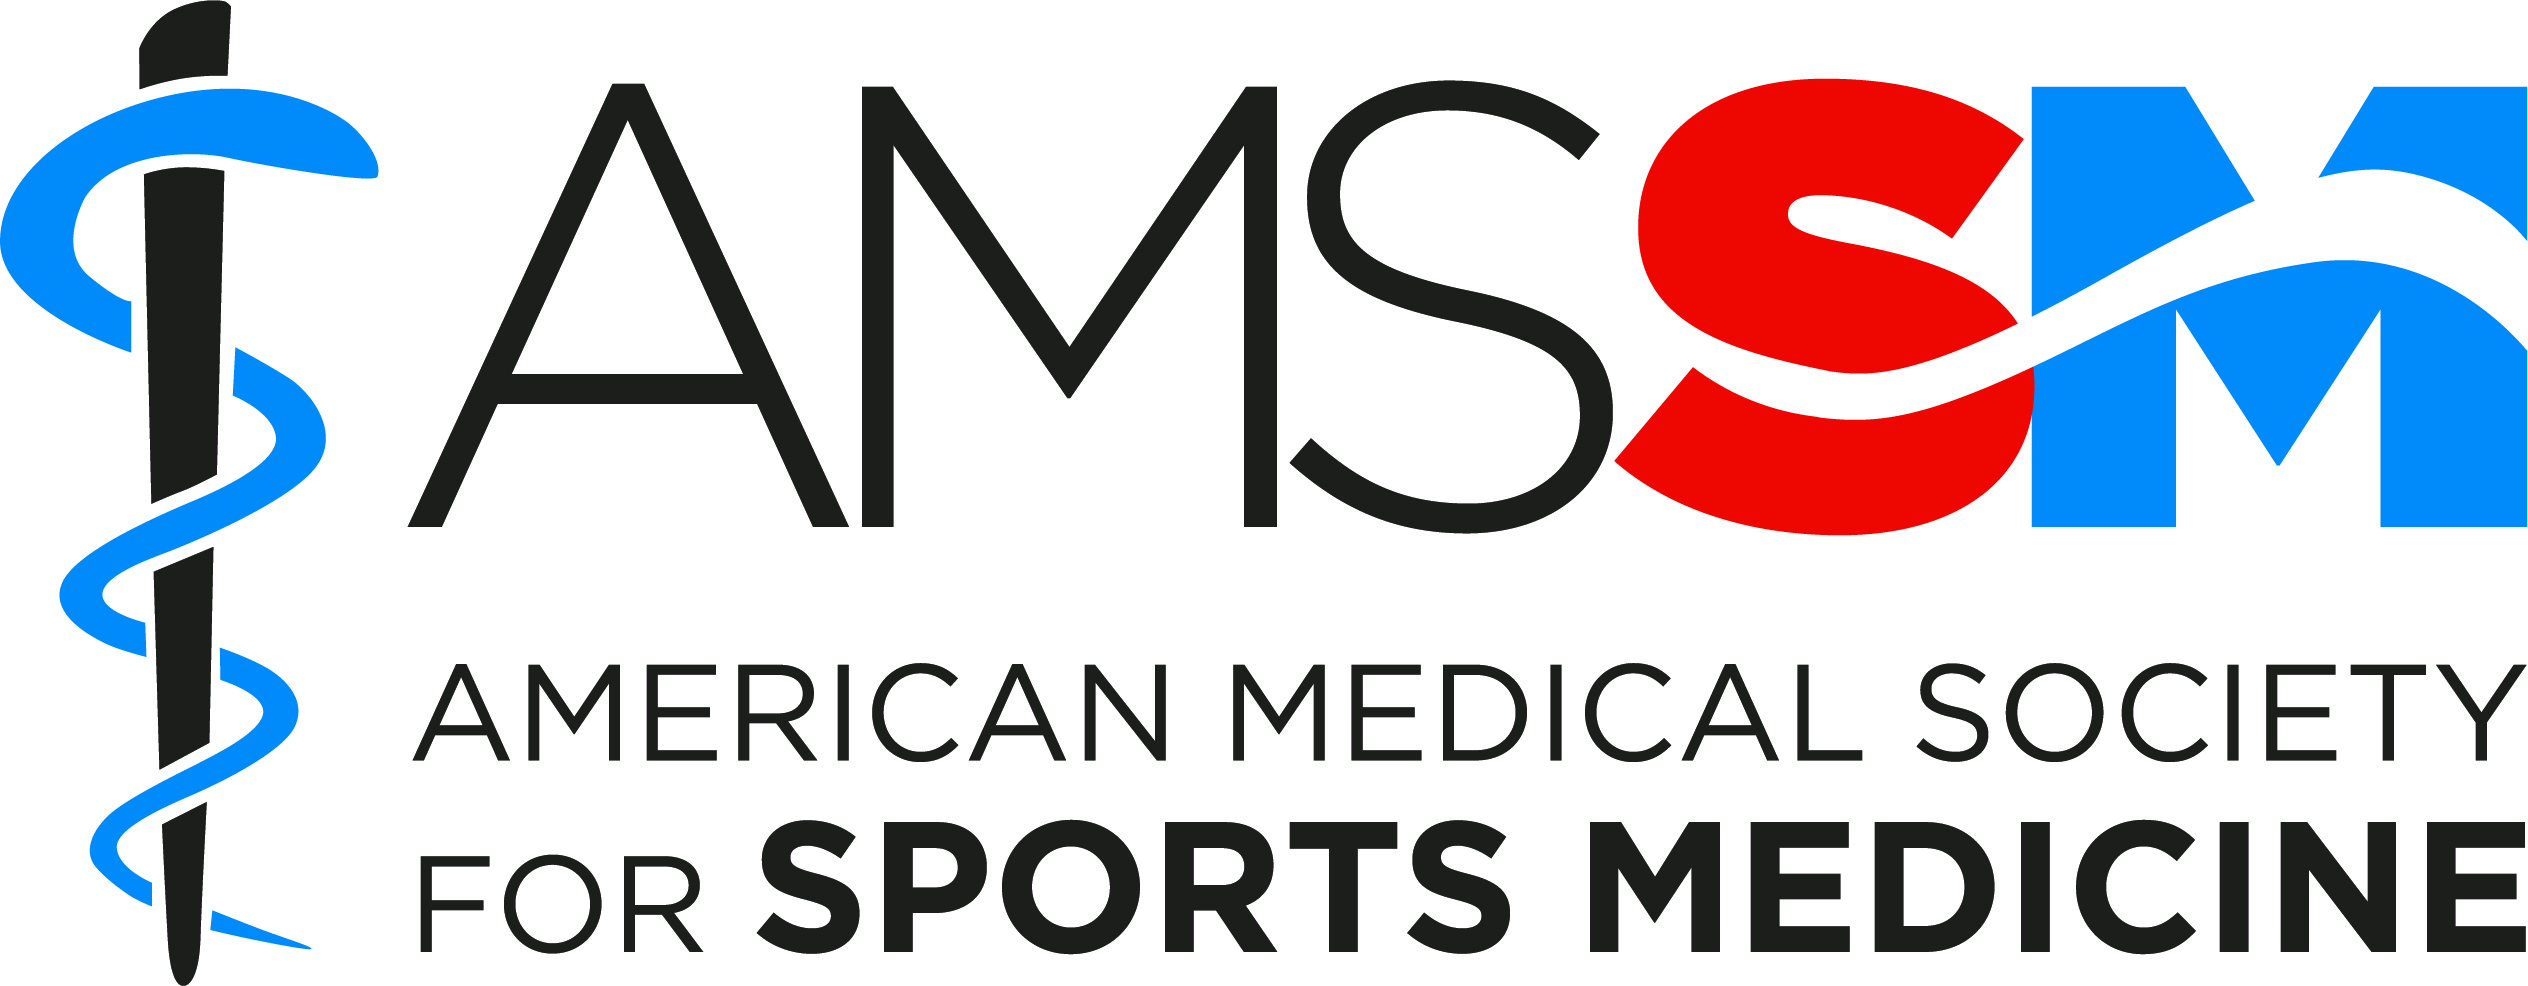 American Medical Society for Sports Medicine